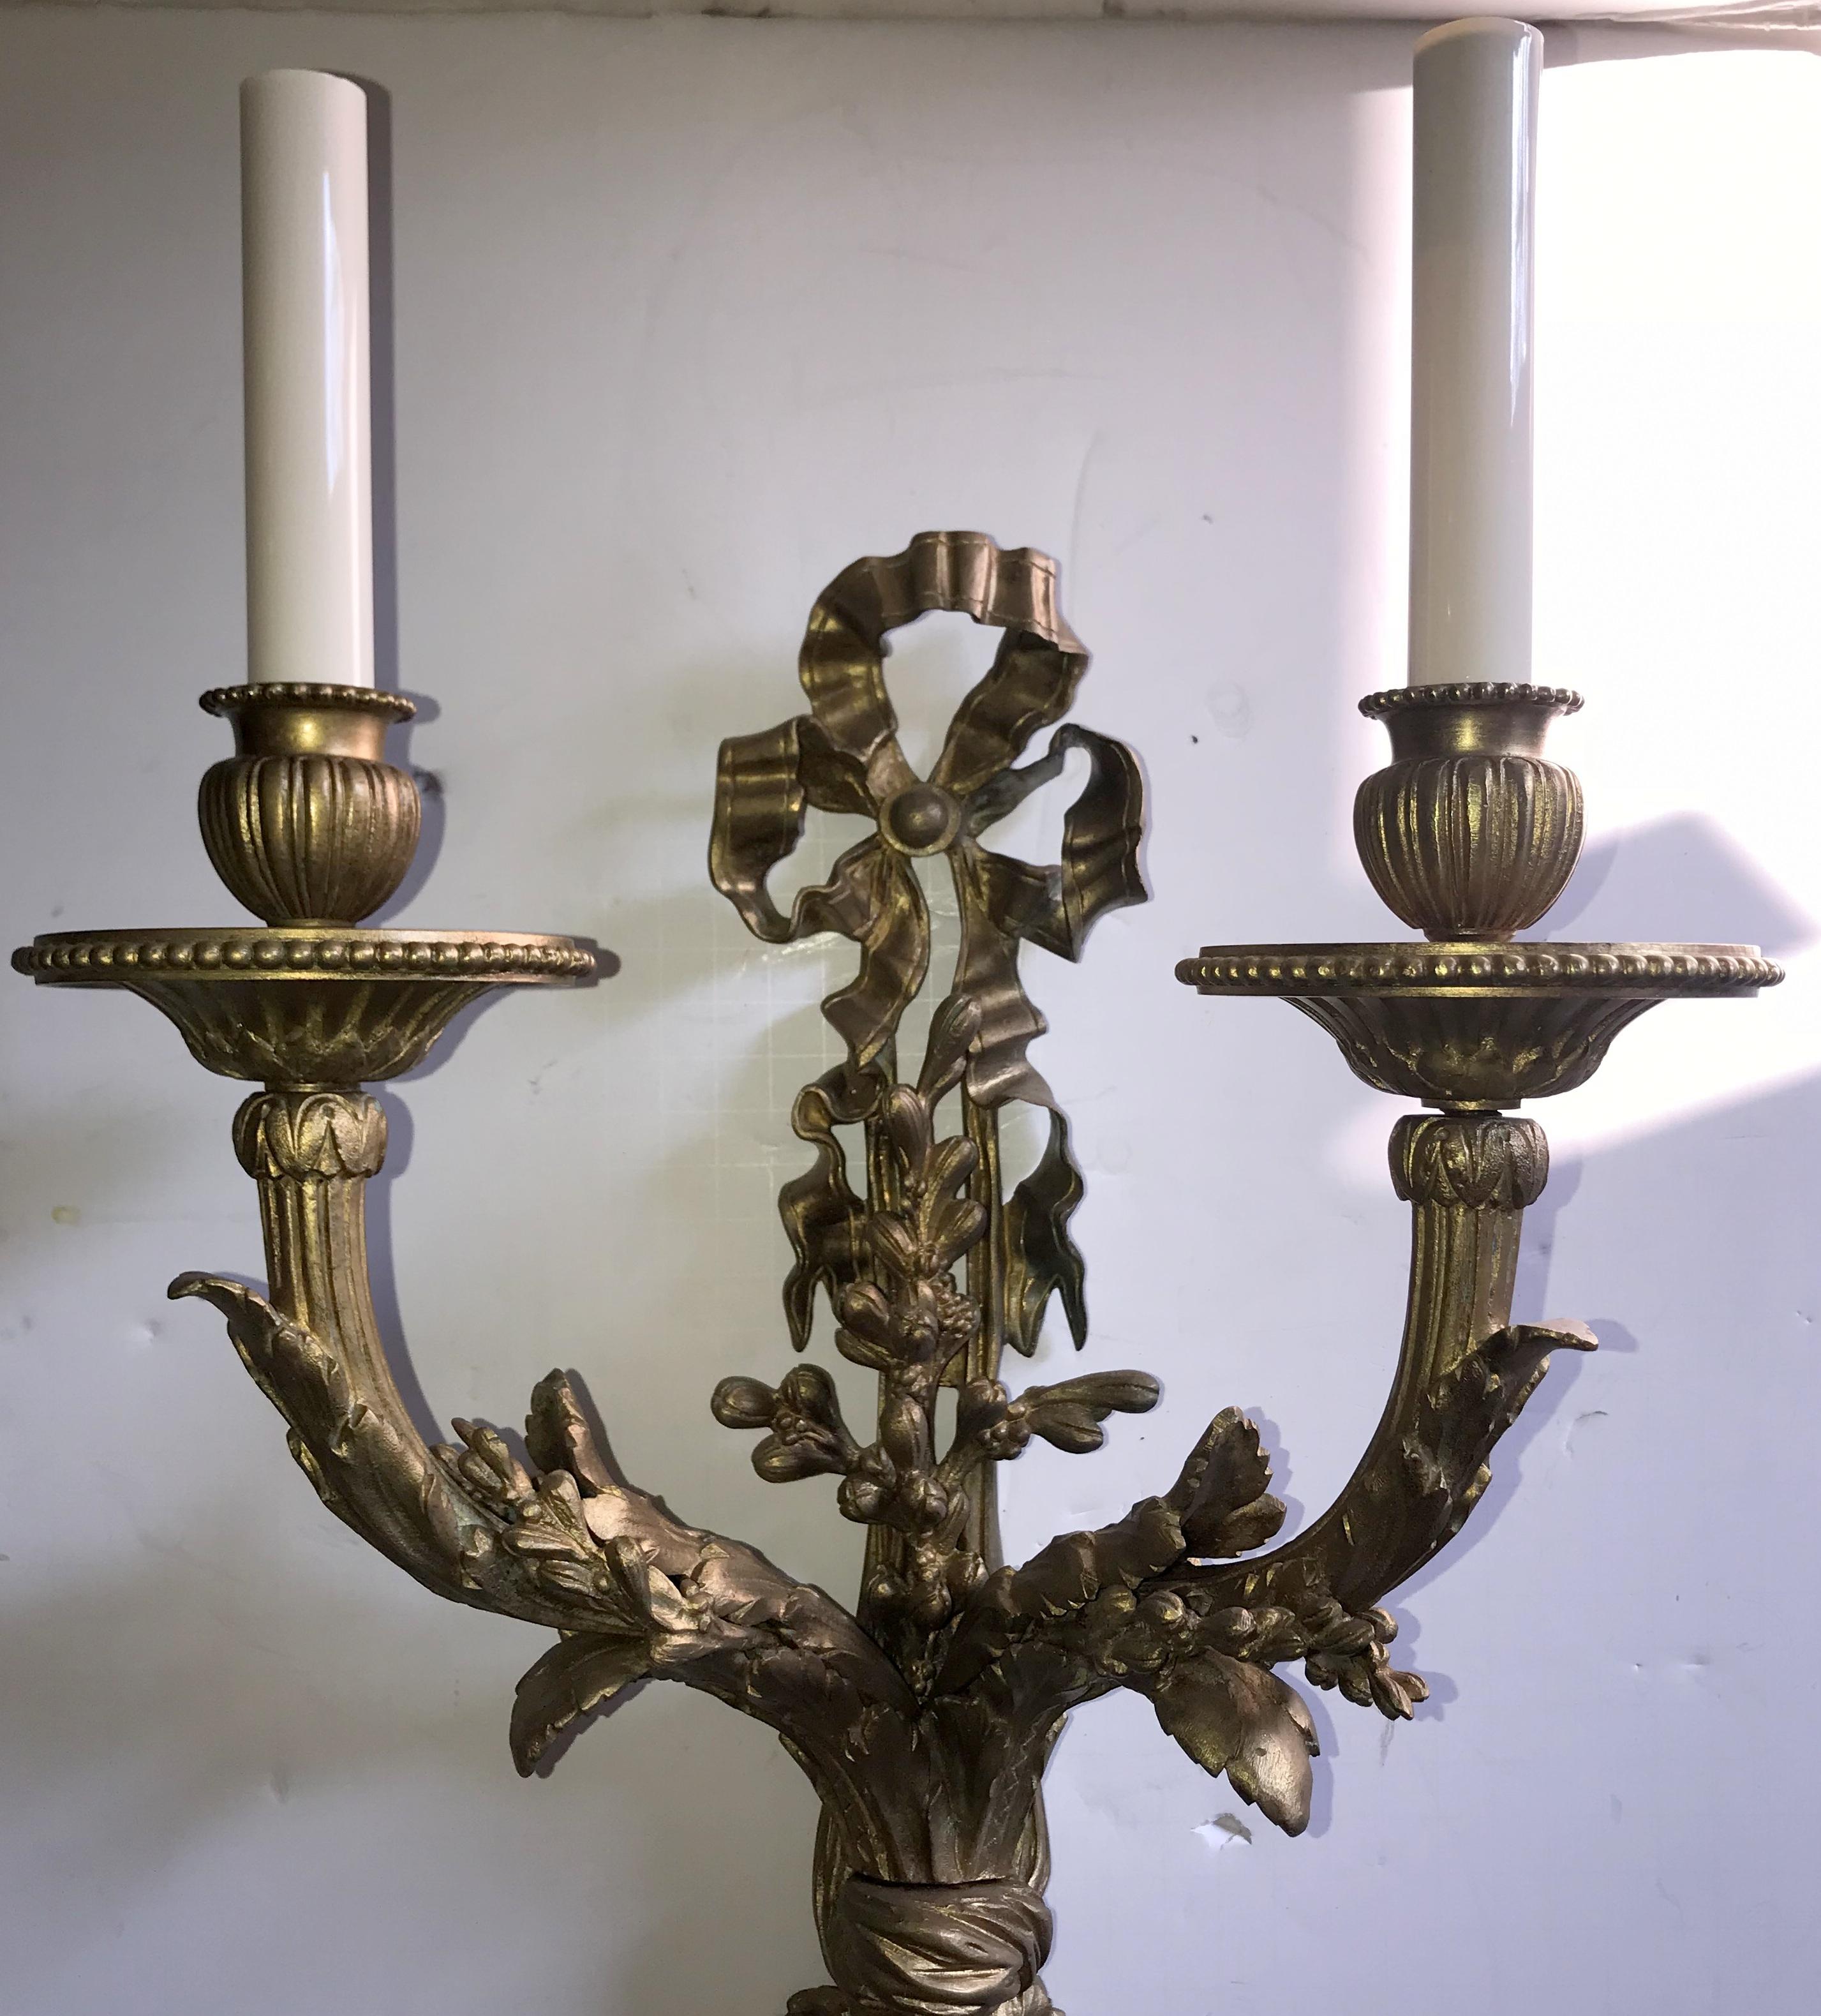 An elegant pair of bow top sconces, circa early 20th century, French bronze with a wonderful aged patina. The bow with the cascading ribbons entwining the beautiful floral filigree and seed detail along both arms and the center finish with the